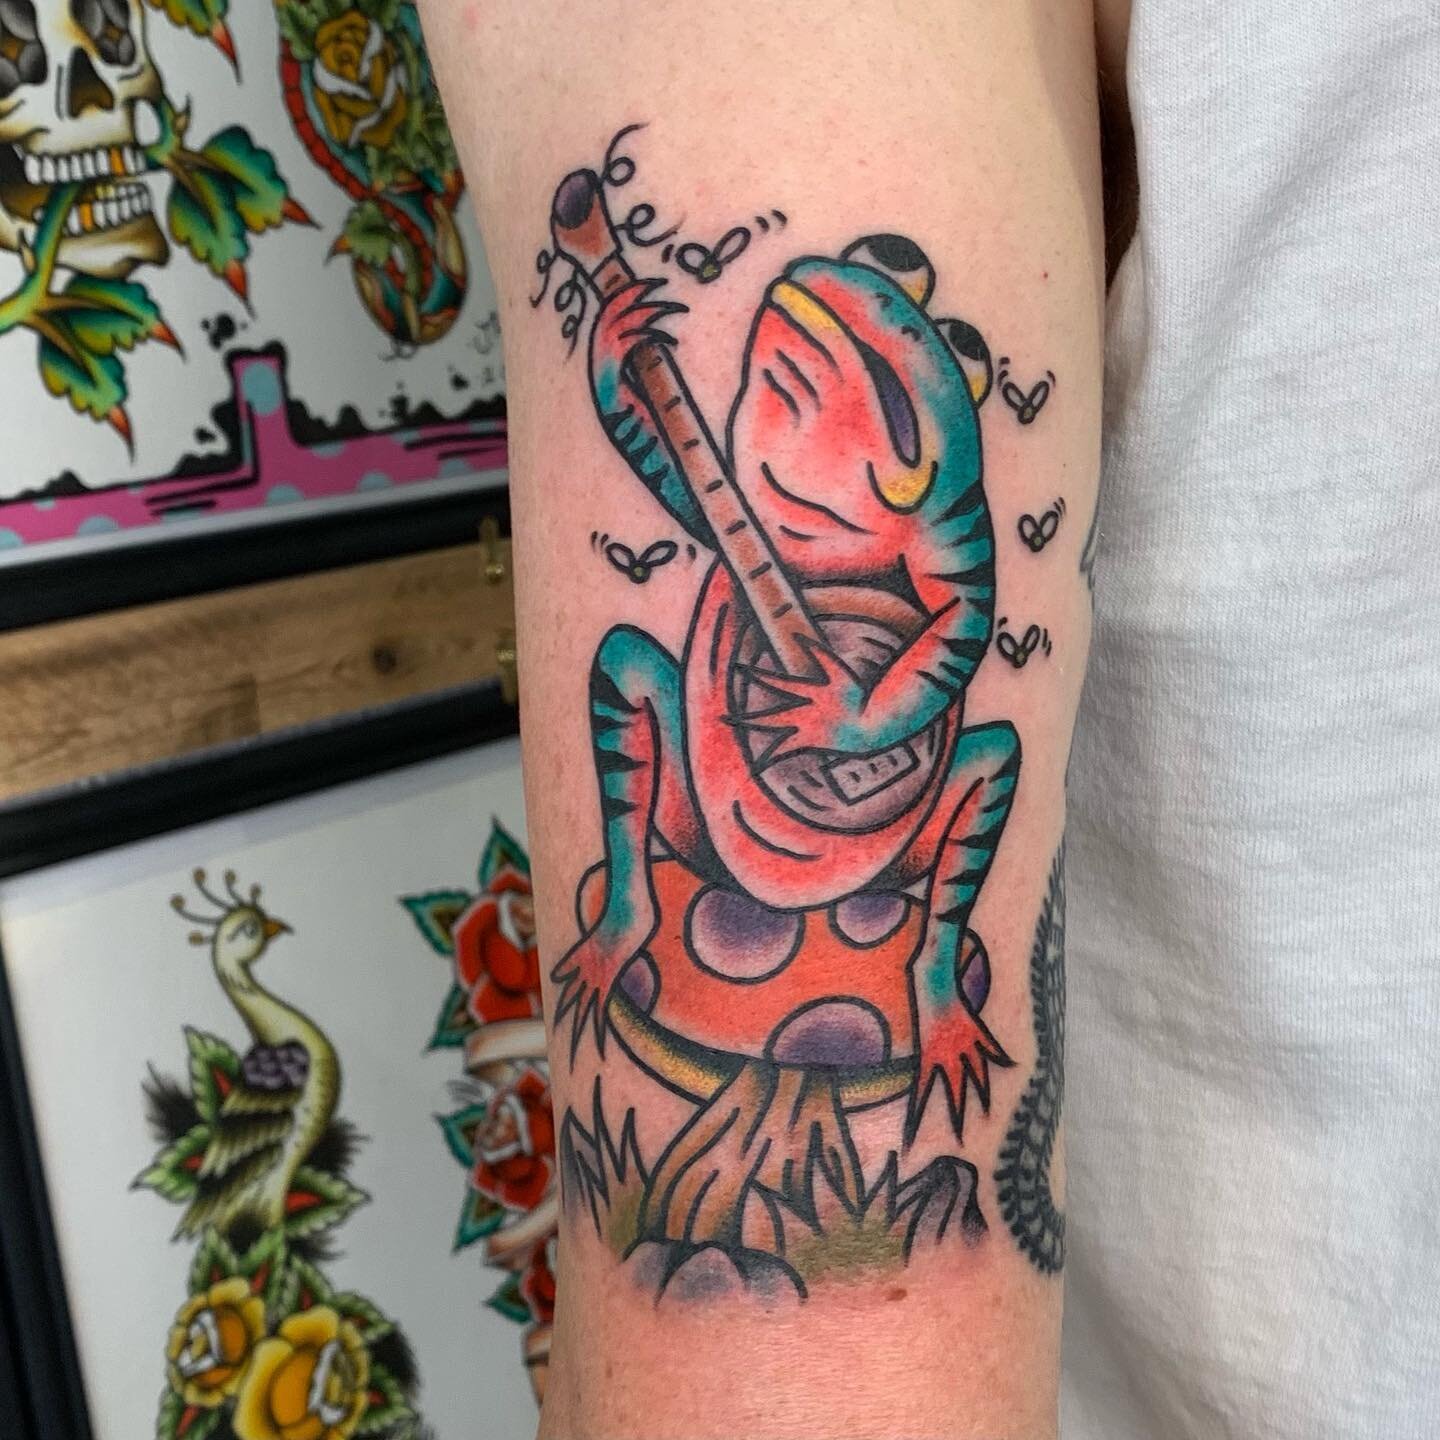 No posts for 27 weeks, coming&rsquo; in hot with my Psychedelic Banjo Toad from @j.haustattooer at @sweet.heart.tattoo with @gold.tooth.cult riding shotgun. Thanks for my birthday art and generally nice afternoon. Can&rsquo;t wait for the next sit do